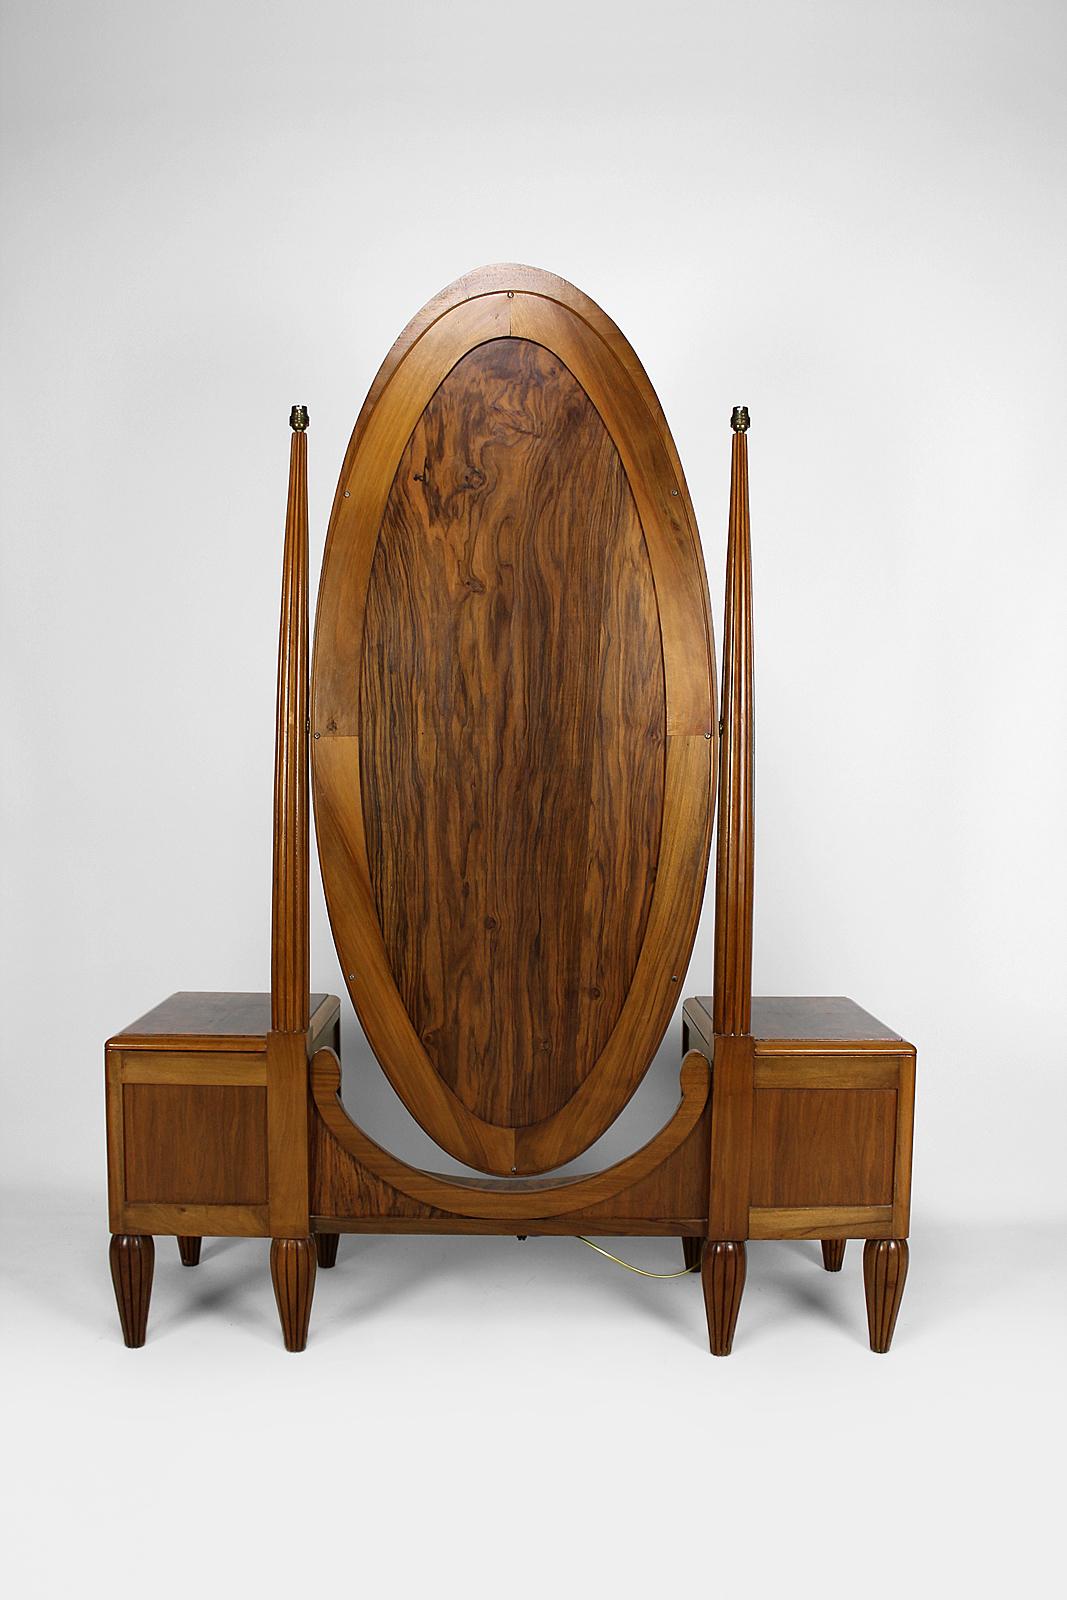 Early 20th Century Art Deco Psyche Dressing Table and Pouf by Ateliers Gauthier-Poinsignon, c. 1920 For Sale